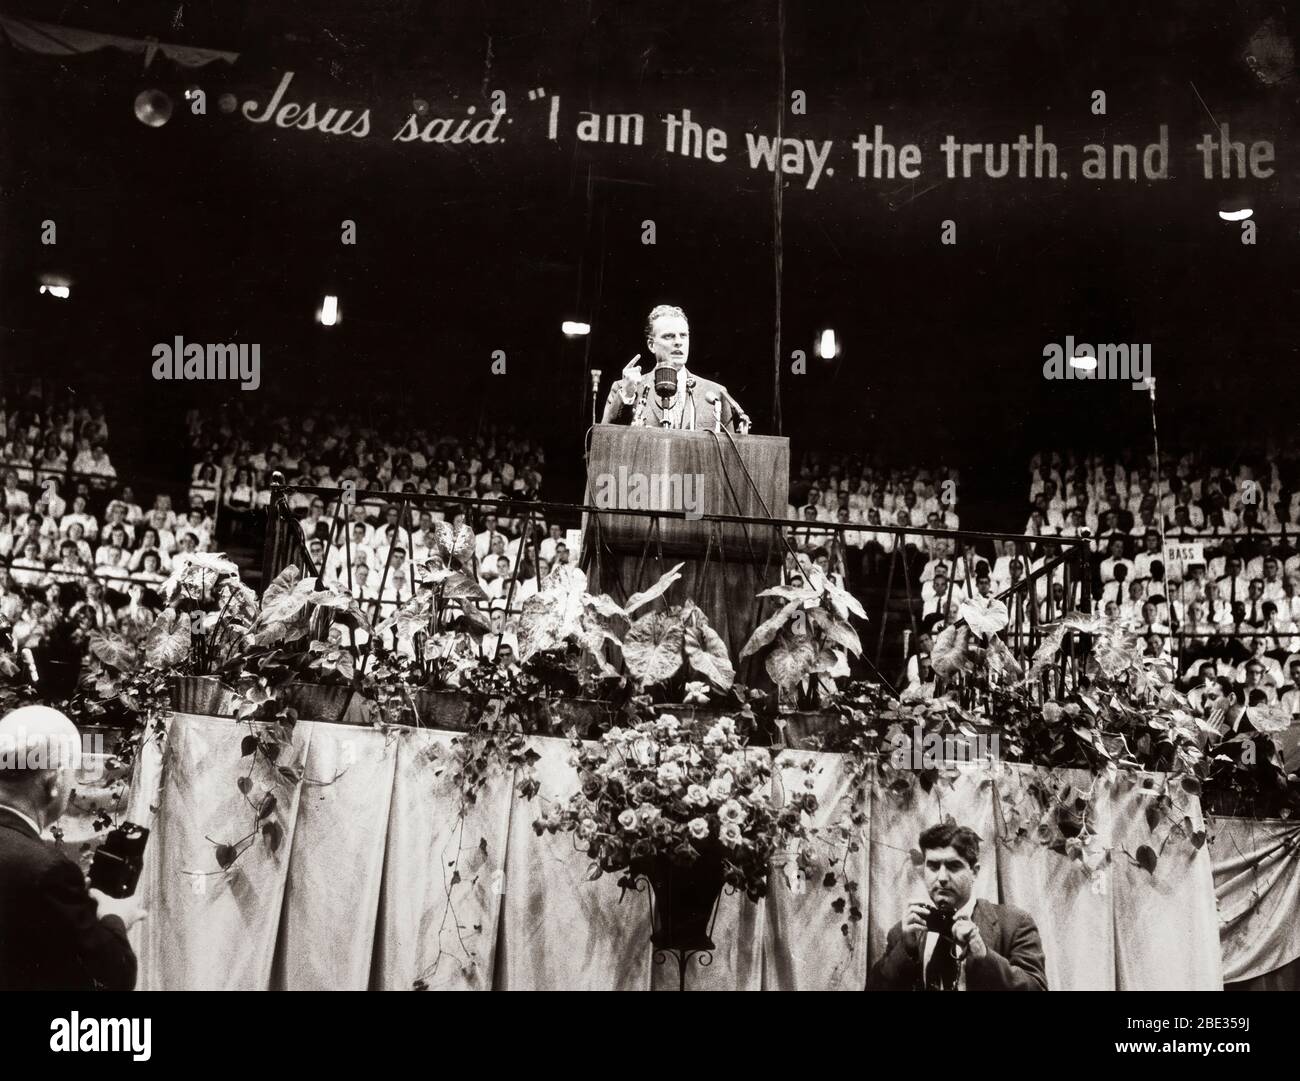 Oct. 2, 1960 - London, England, U.K. - BILLY GRAHAM, born William Franklin Graham, Jr., is an evangelical Christian reverend and evangelist. He gained fame due to his sermons being broadcast on the radio and television. PICTURED: Billy Graham preaching during one of his sermons. Stock Photo